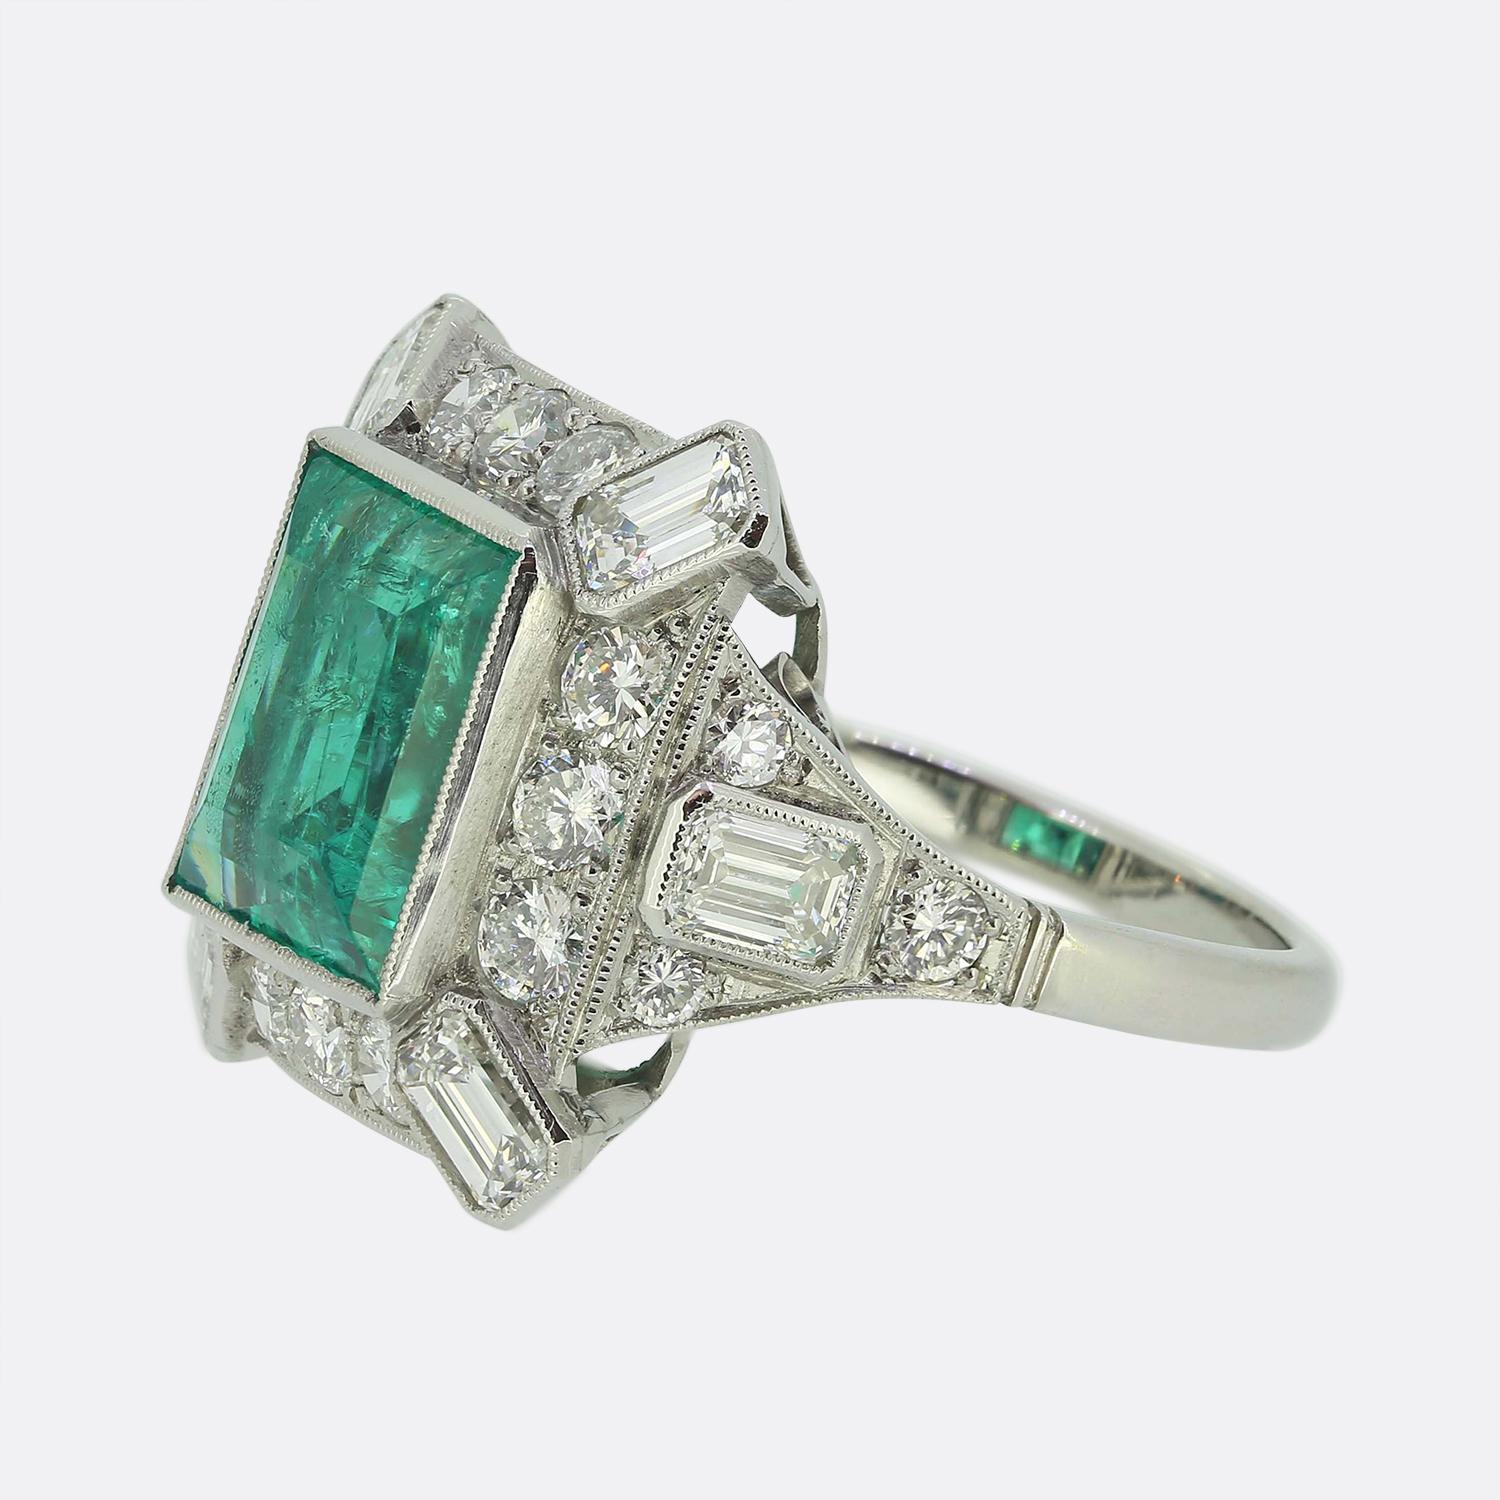 Here we have a fabulous emerald and diamond cluster ring. This vintage piece boasts a sensational carre cut emerald at the centre of the face which is of Colombian origin and possesses a vivid green, slightly blueish colour tone. This principal